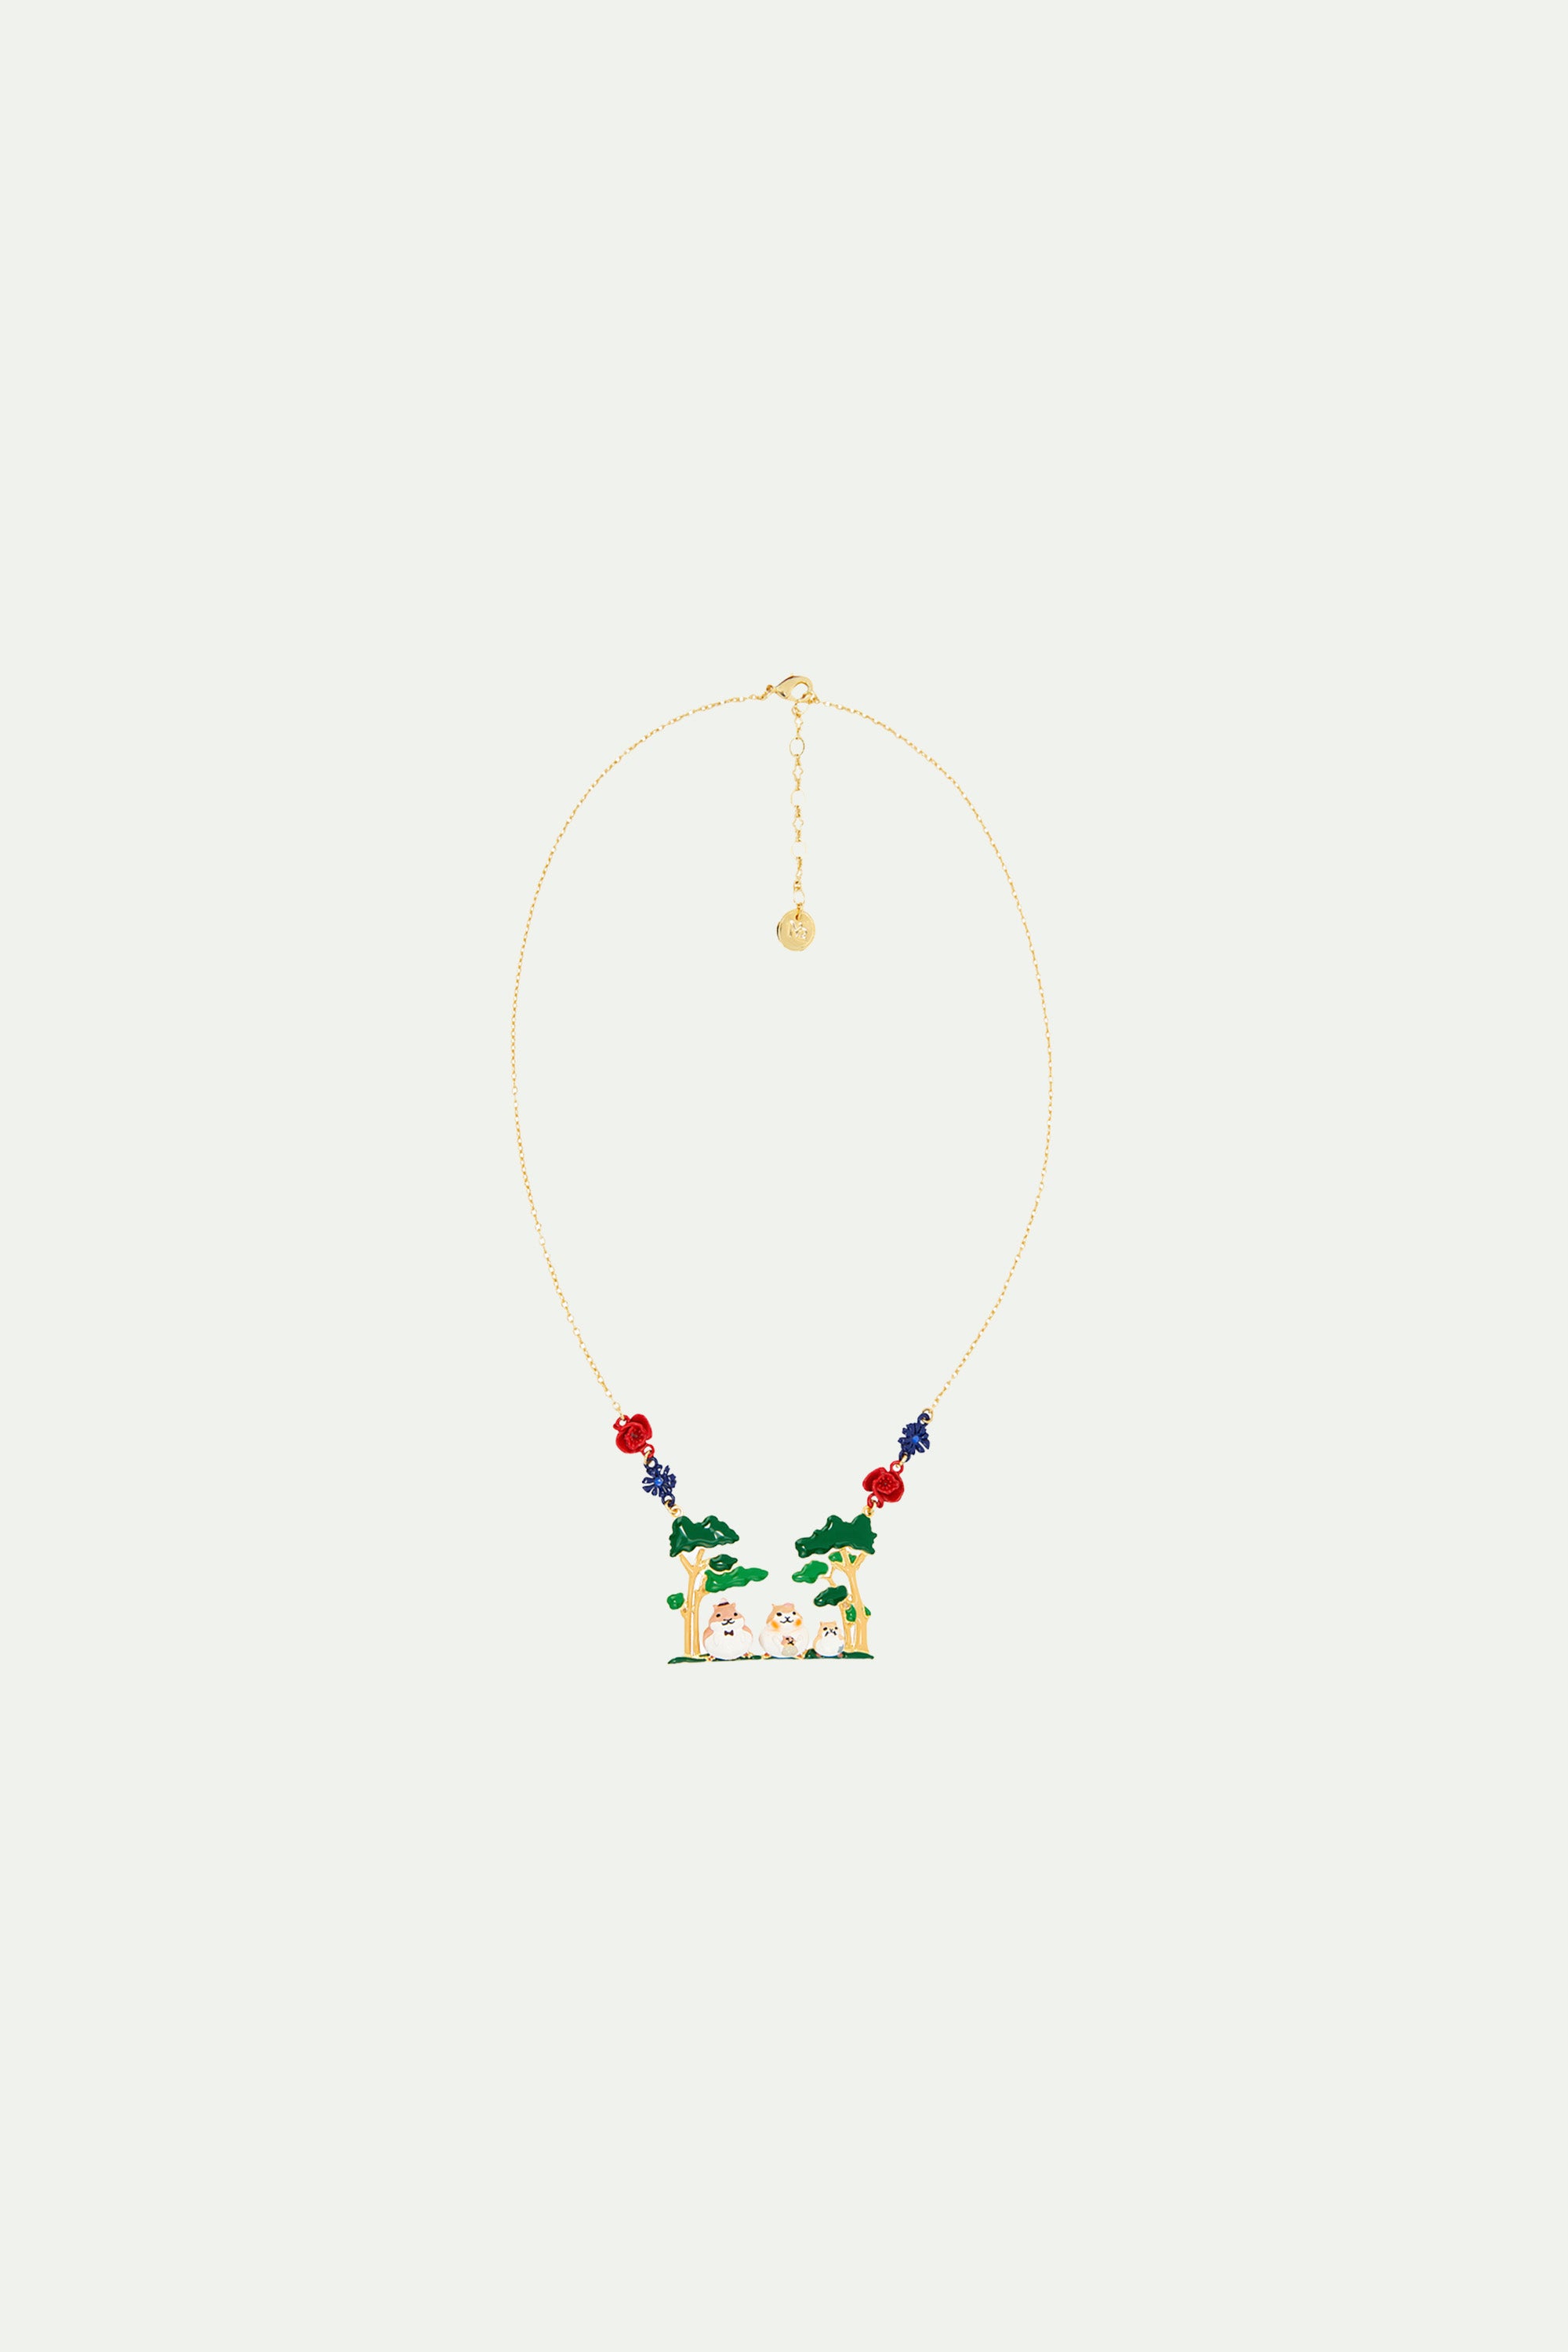 Hamster family forest walk statement necklace